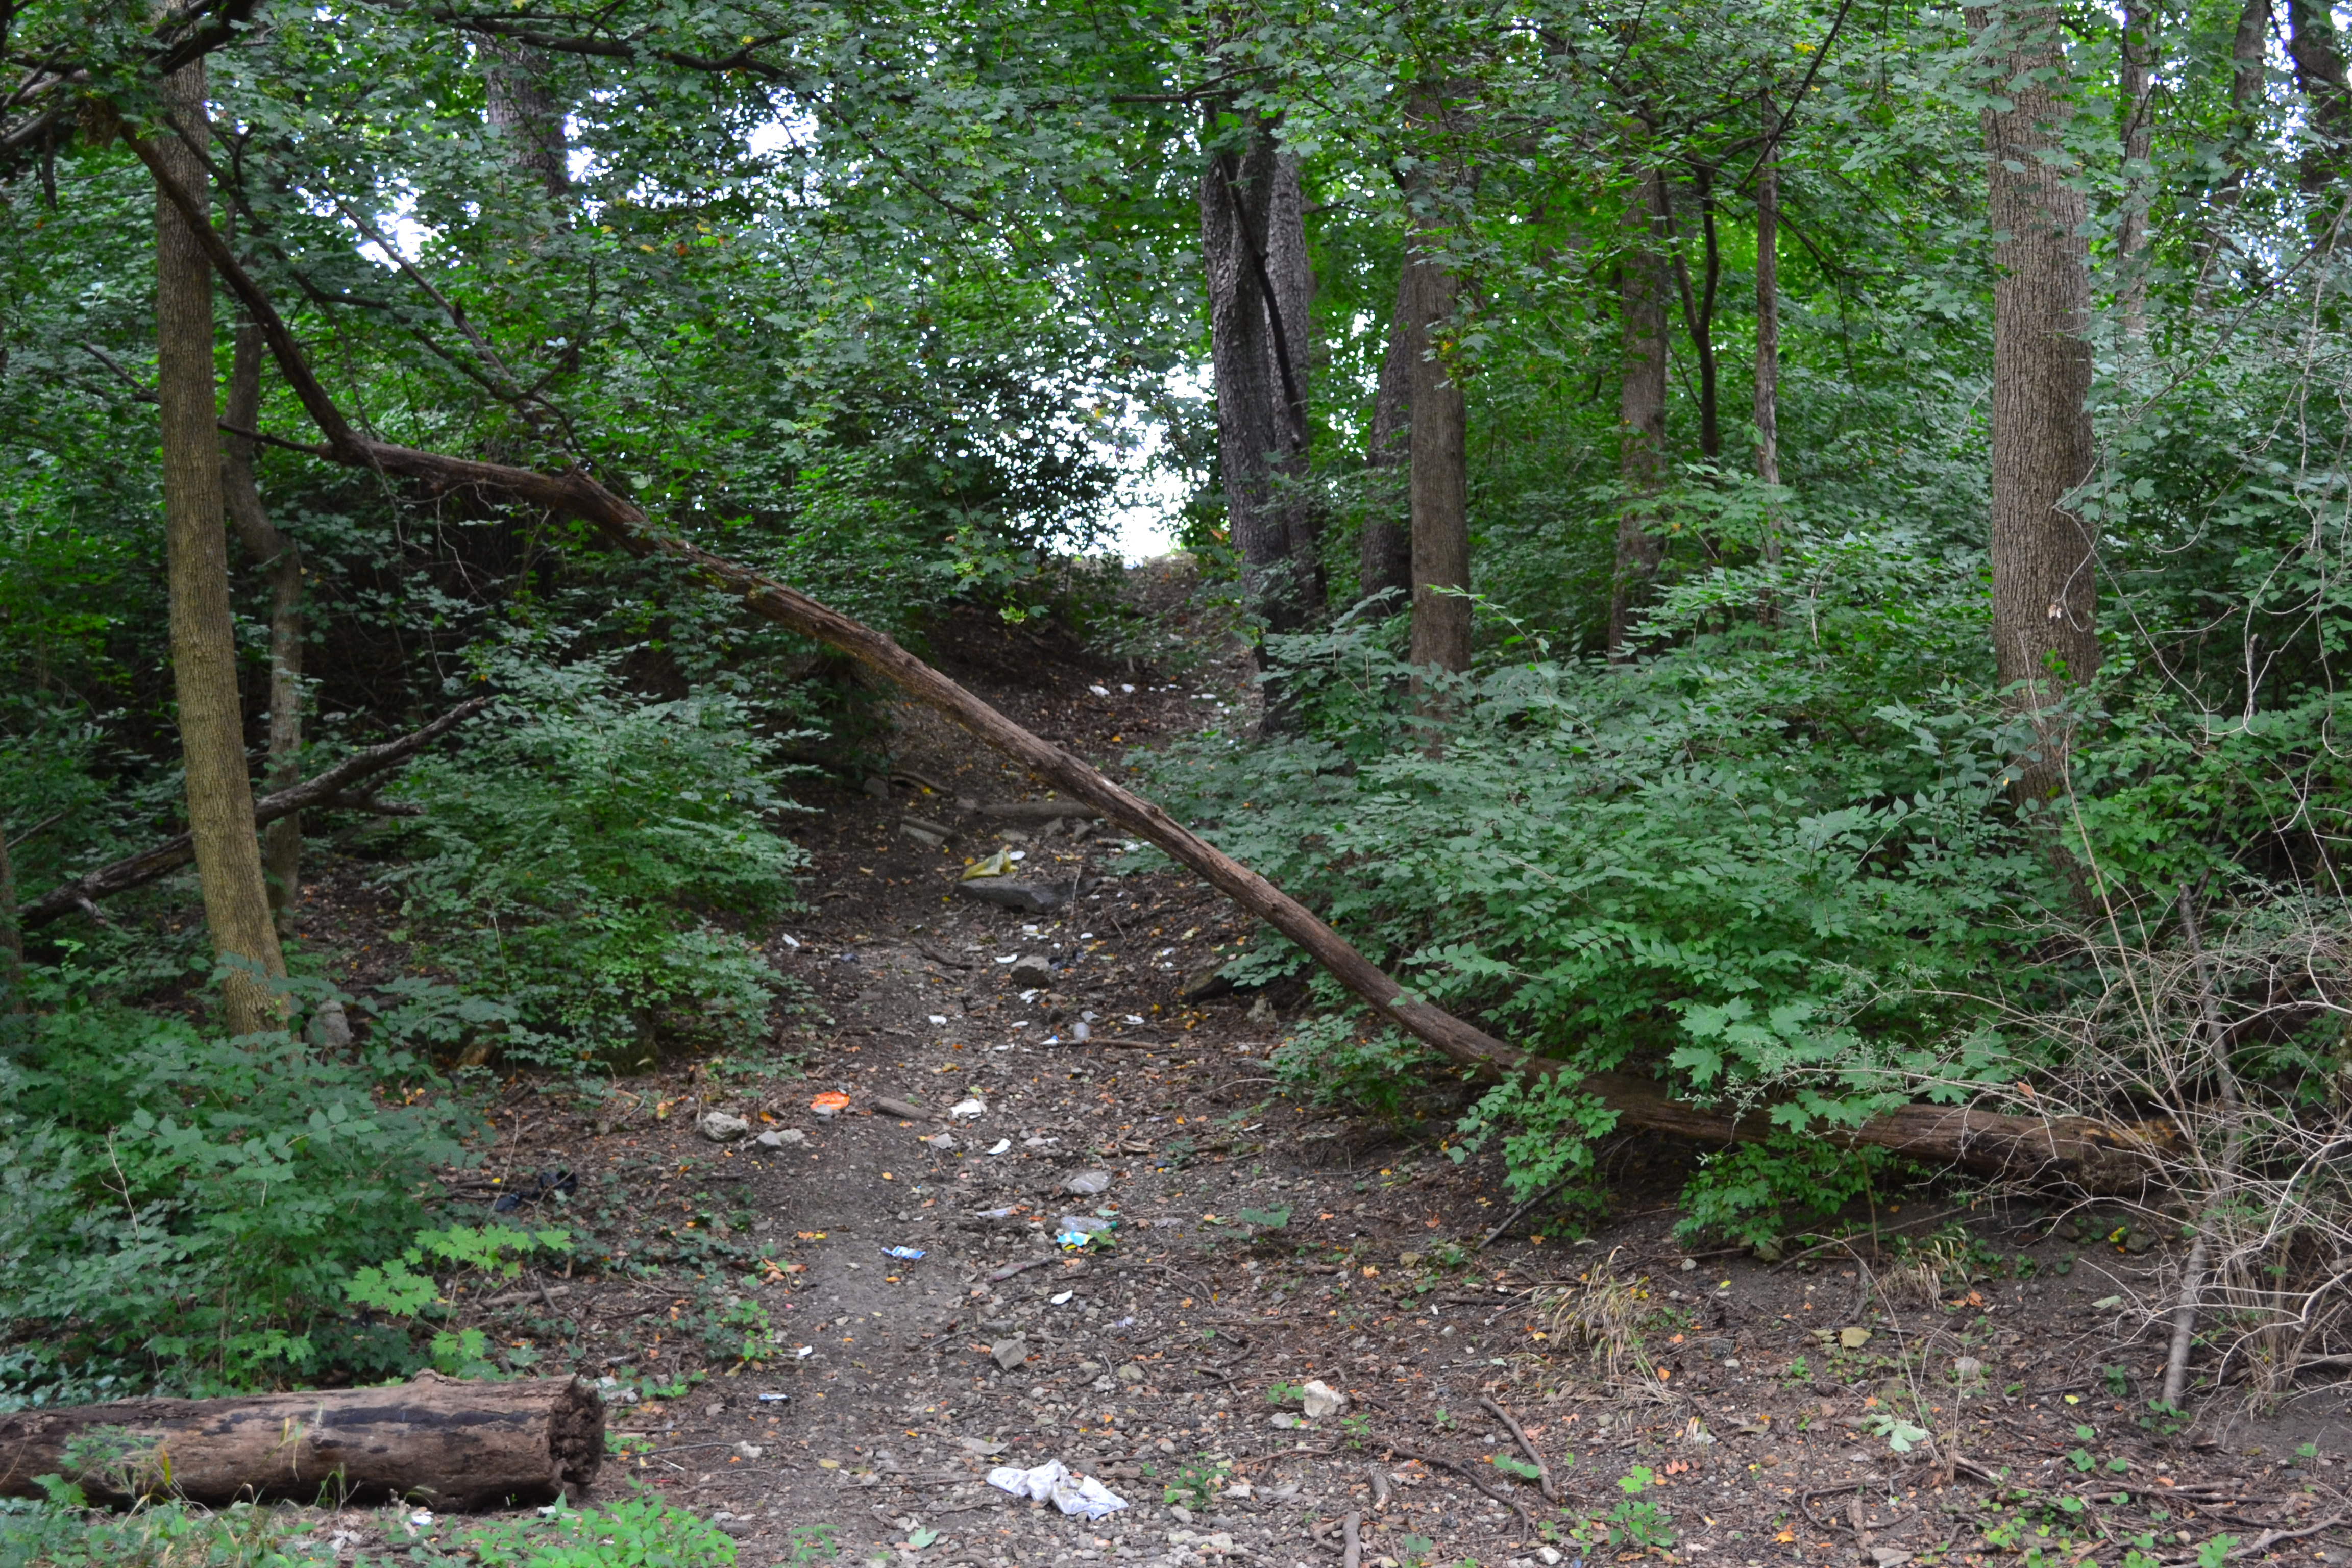 Some unofficial access points like the paved Cobbs Creek Trail with unpaved, off road trails